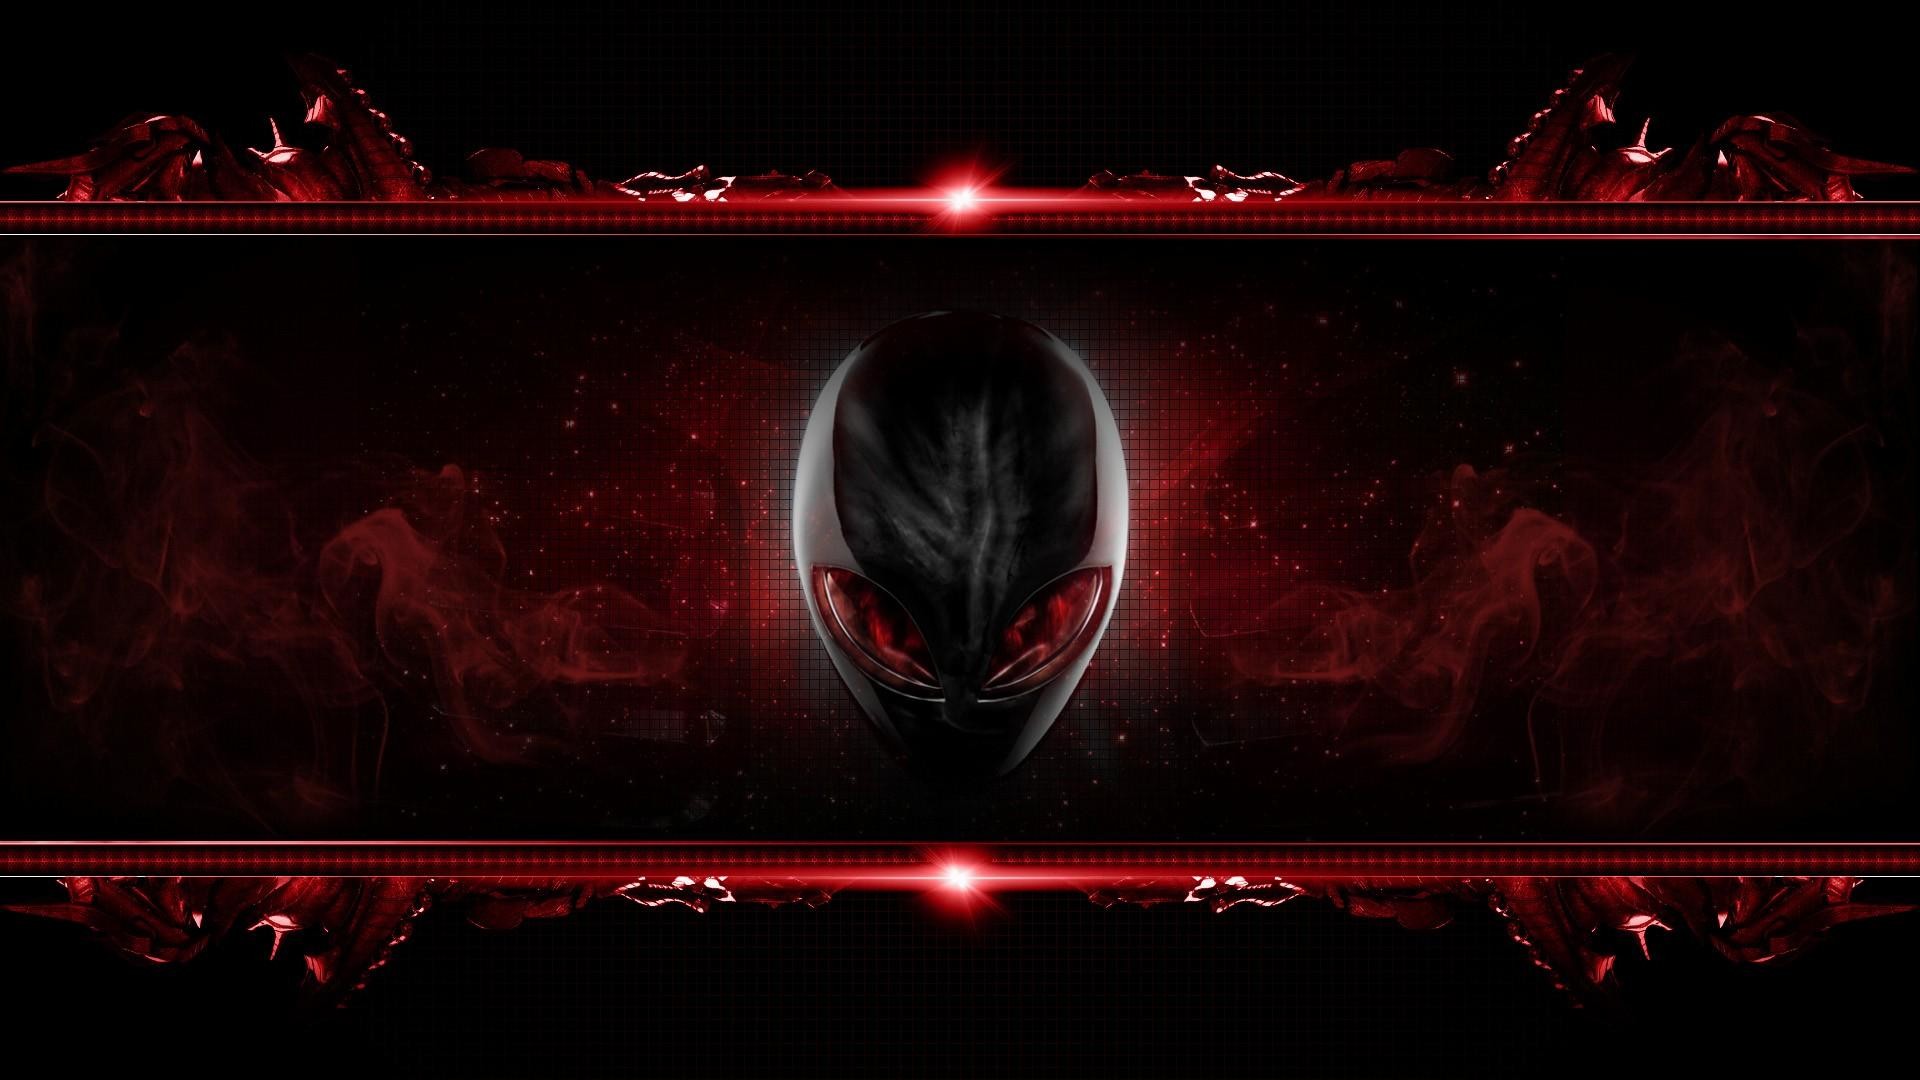 1920x1080 8. cool-red-wallpapers-HD8-600x338